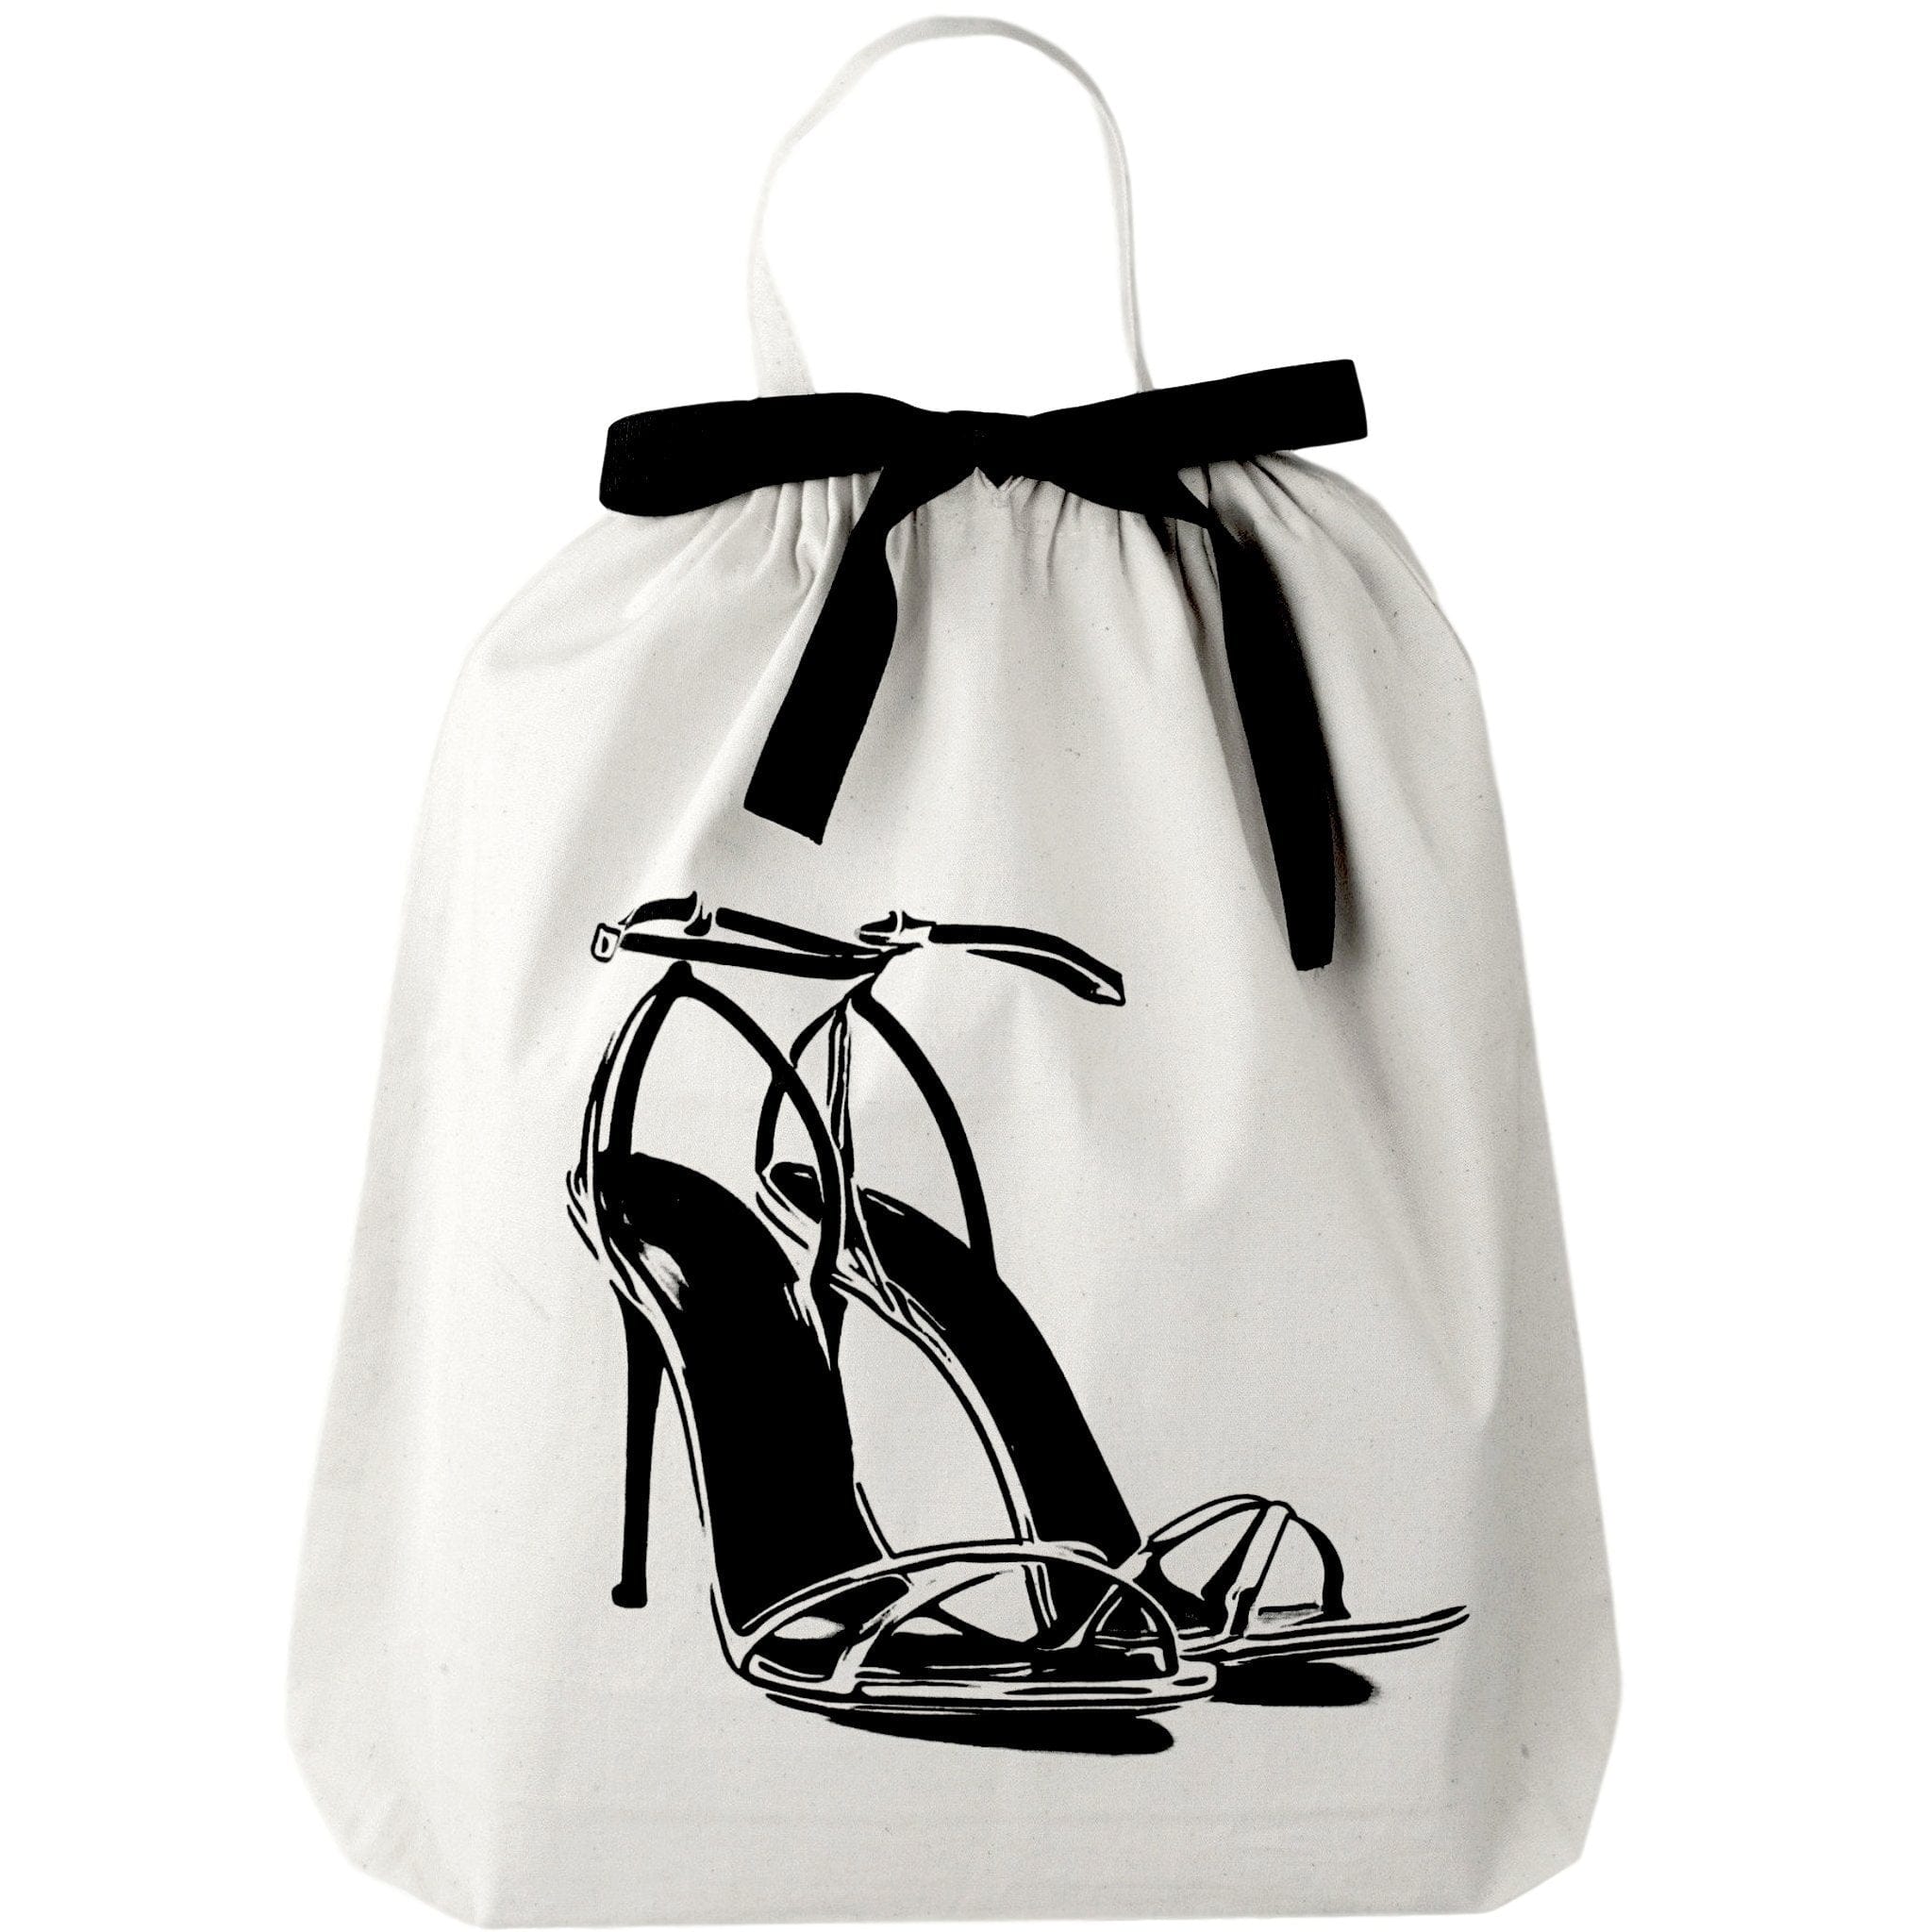 Shoe bag with high heel strappy sandals on the front. 